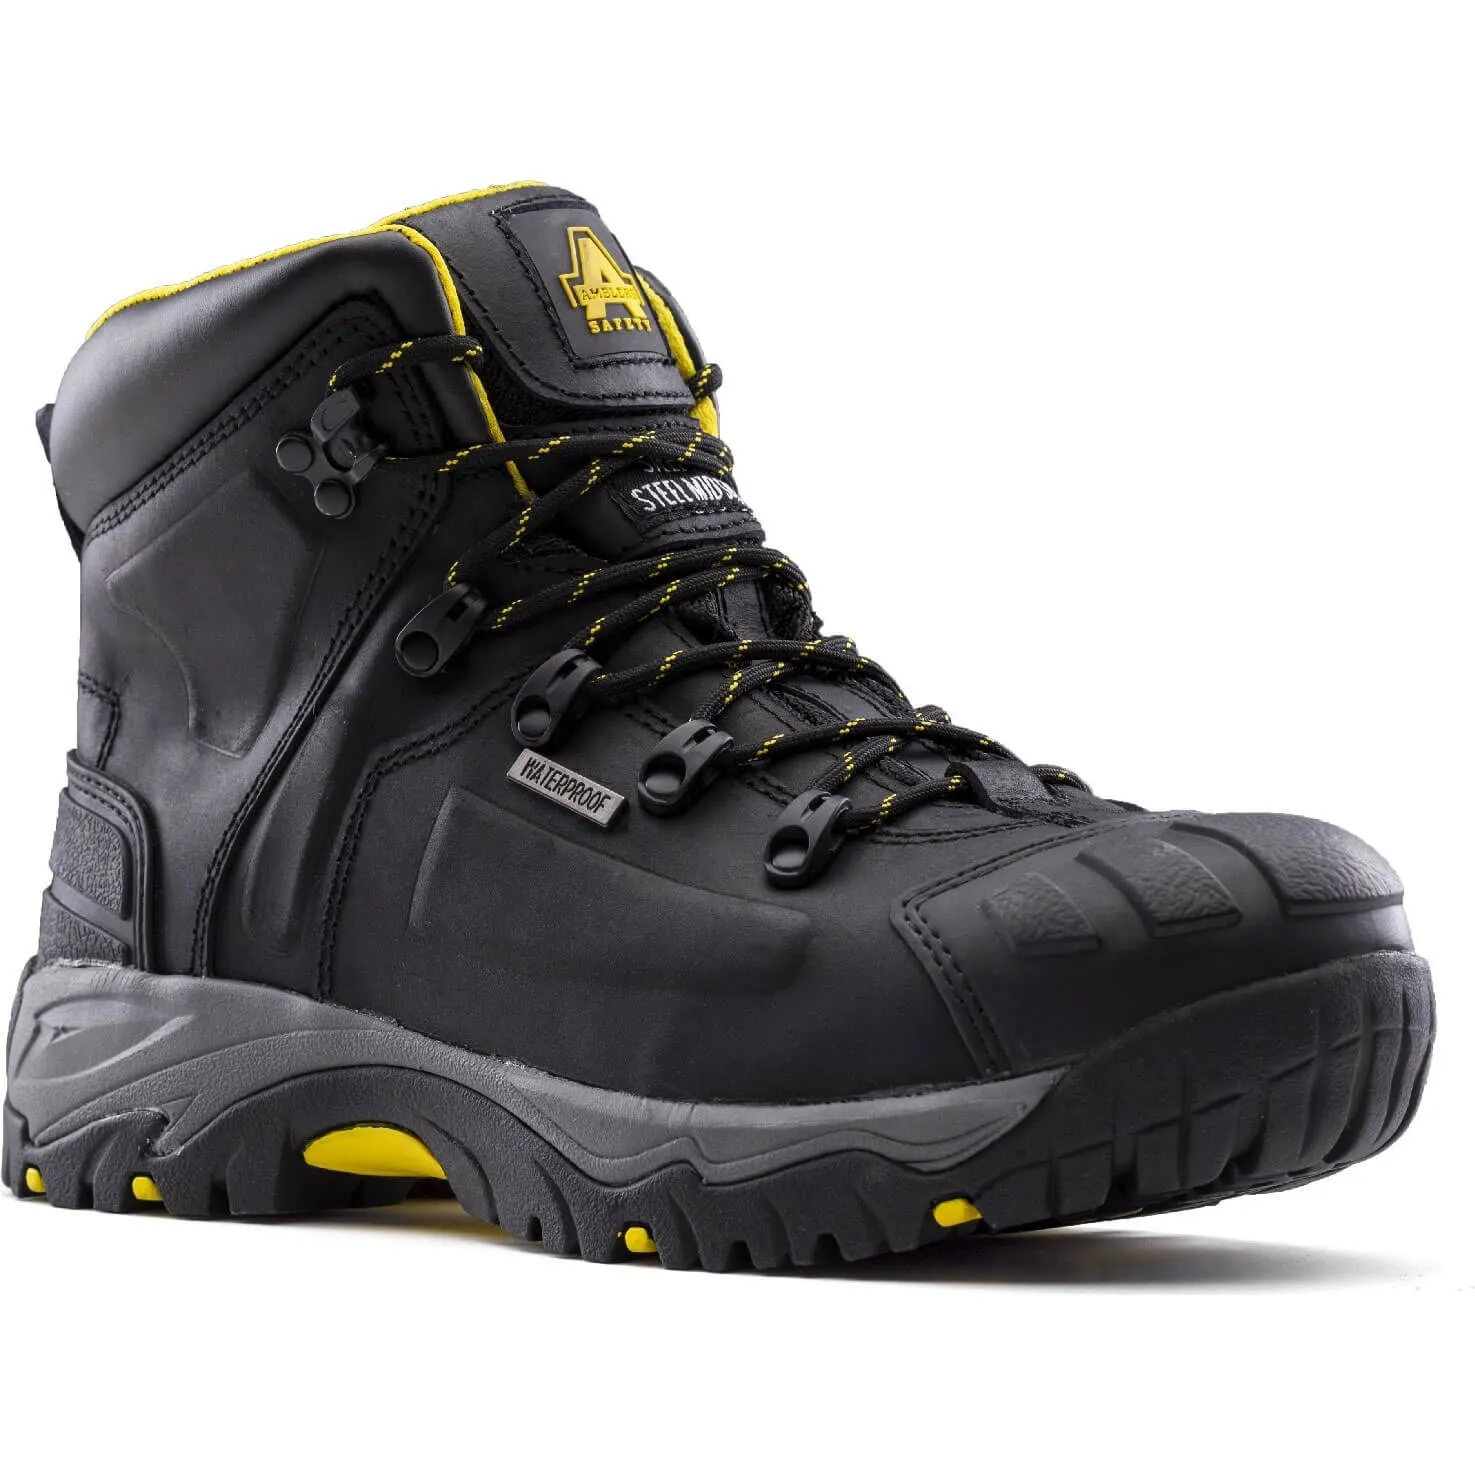 Amblers Safety As803 Waterproof Wide Fit Safety Boot - Black, Size 11